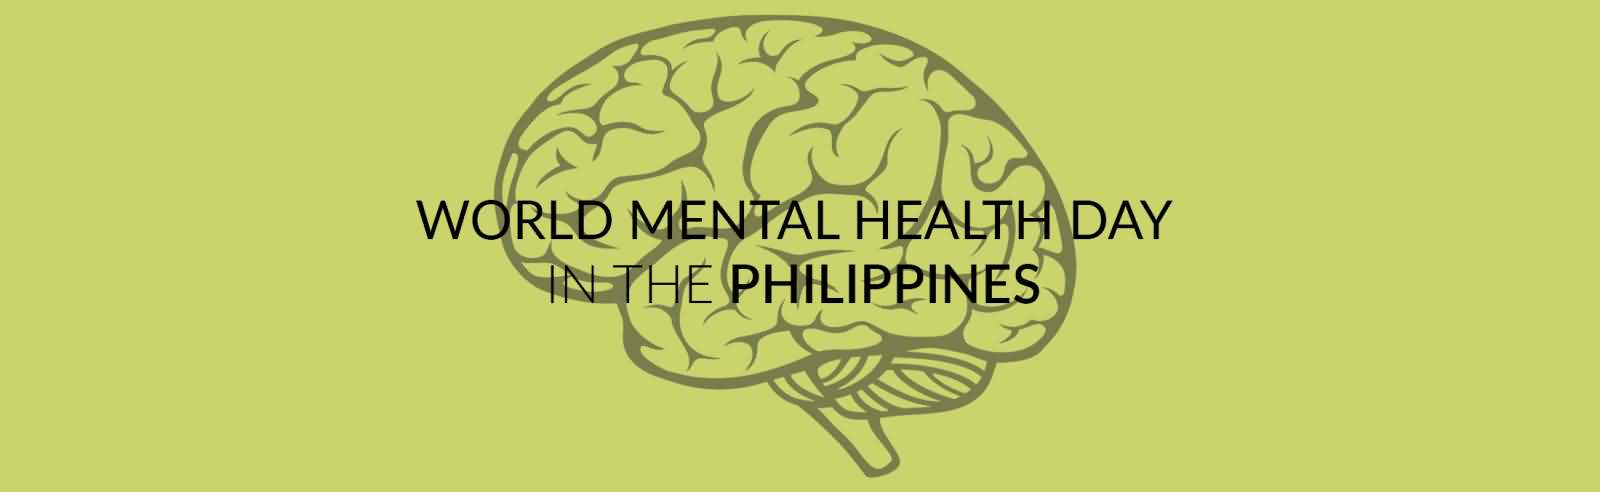 World Mental Health Day In The Philippines Human Brain Header Image